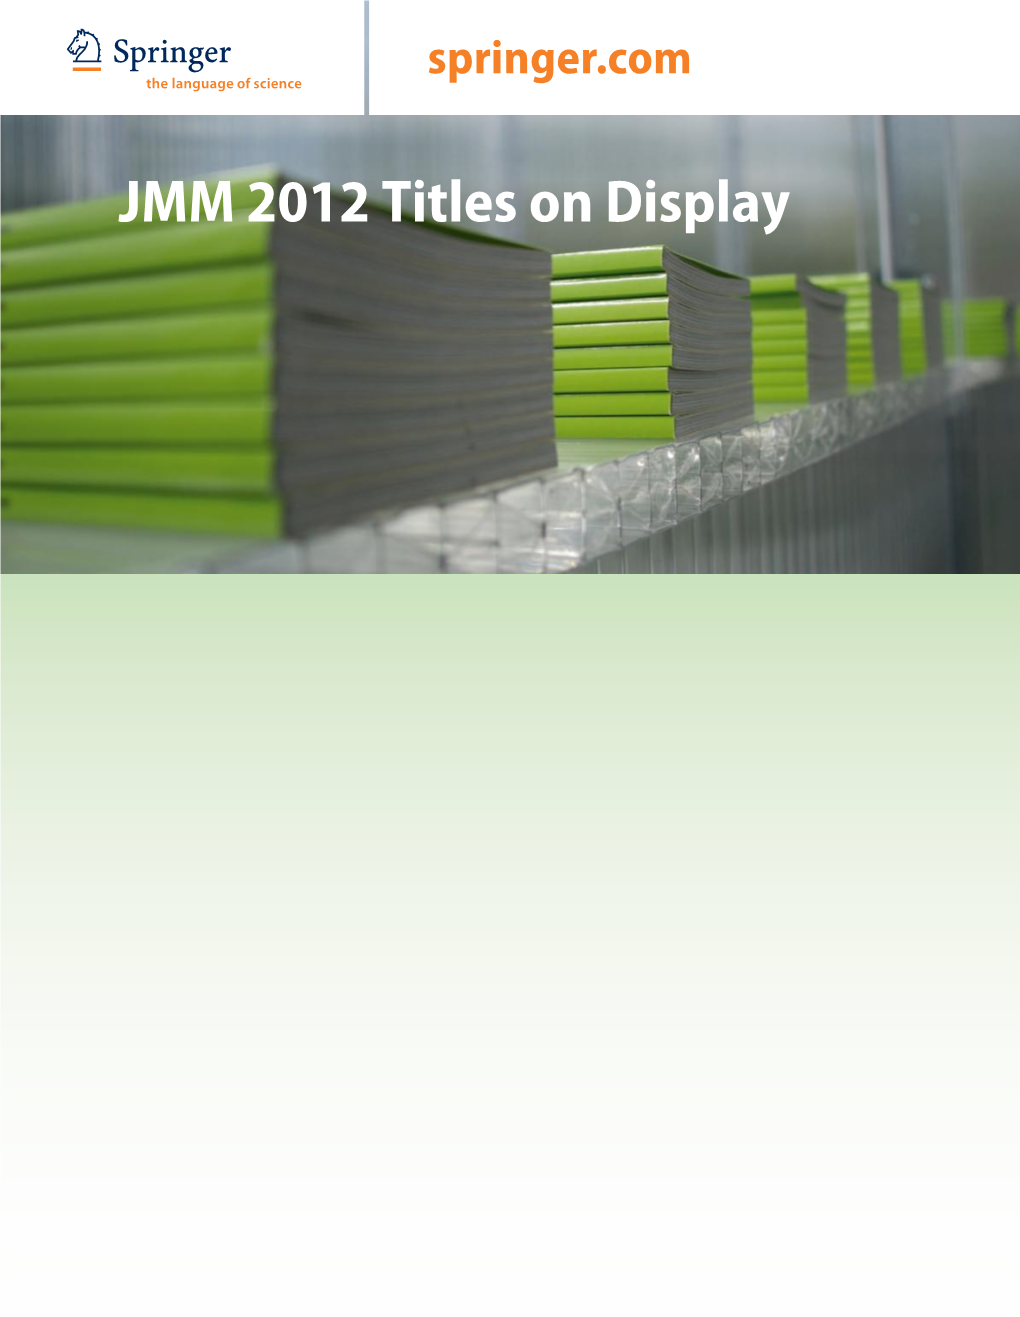 ABCD JMM 2012 Titles on Display